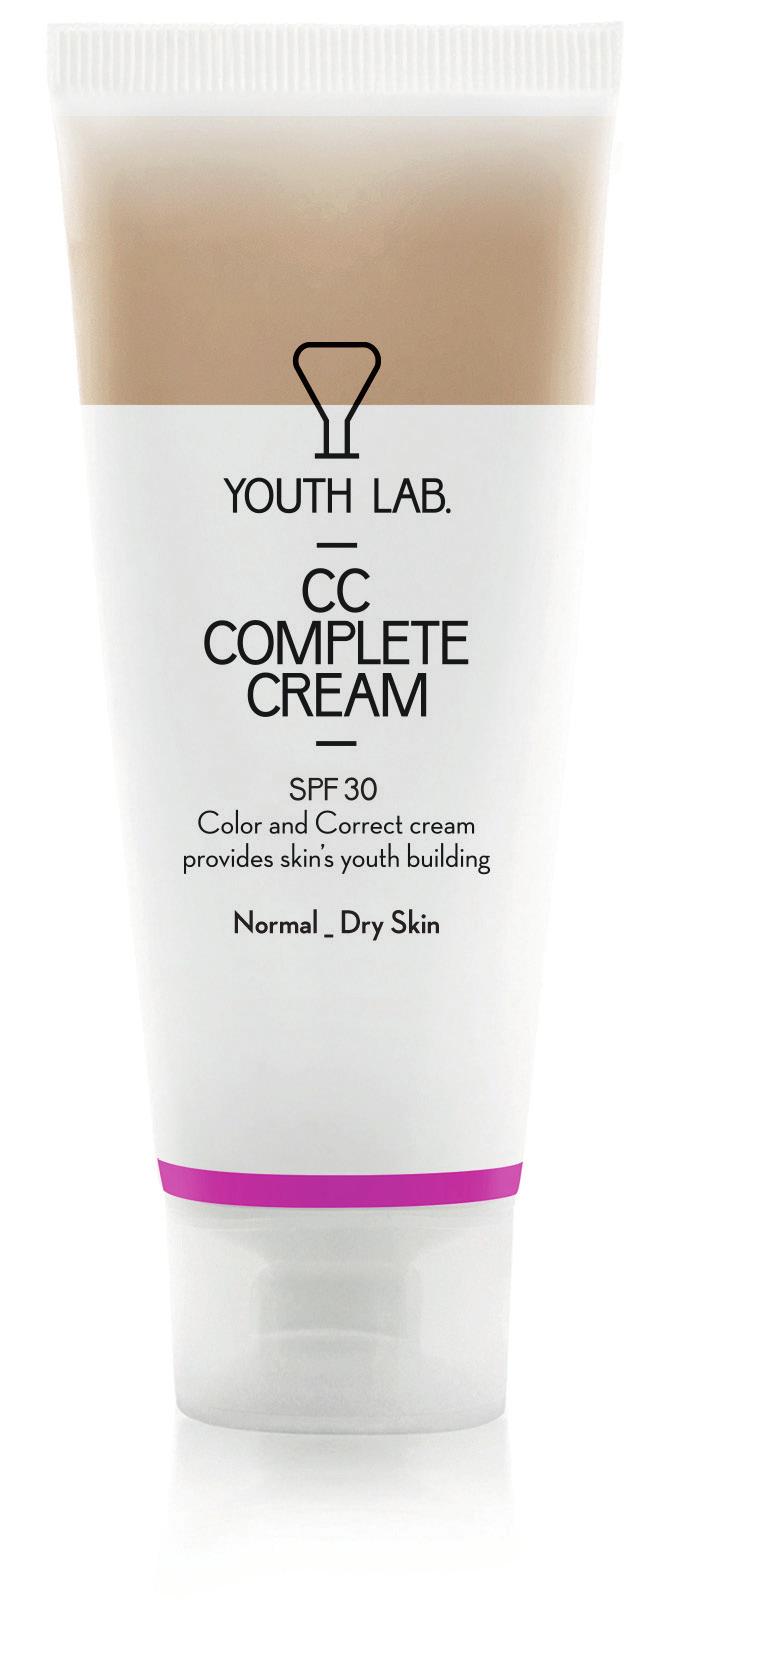 YOUTH LAB www.youthlab.com cc cream 14,95 5 One of the new brands in the November box is a product from Youth Lab.